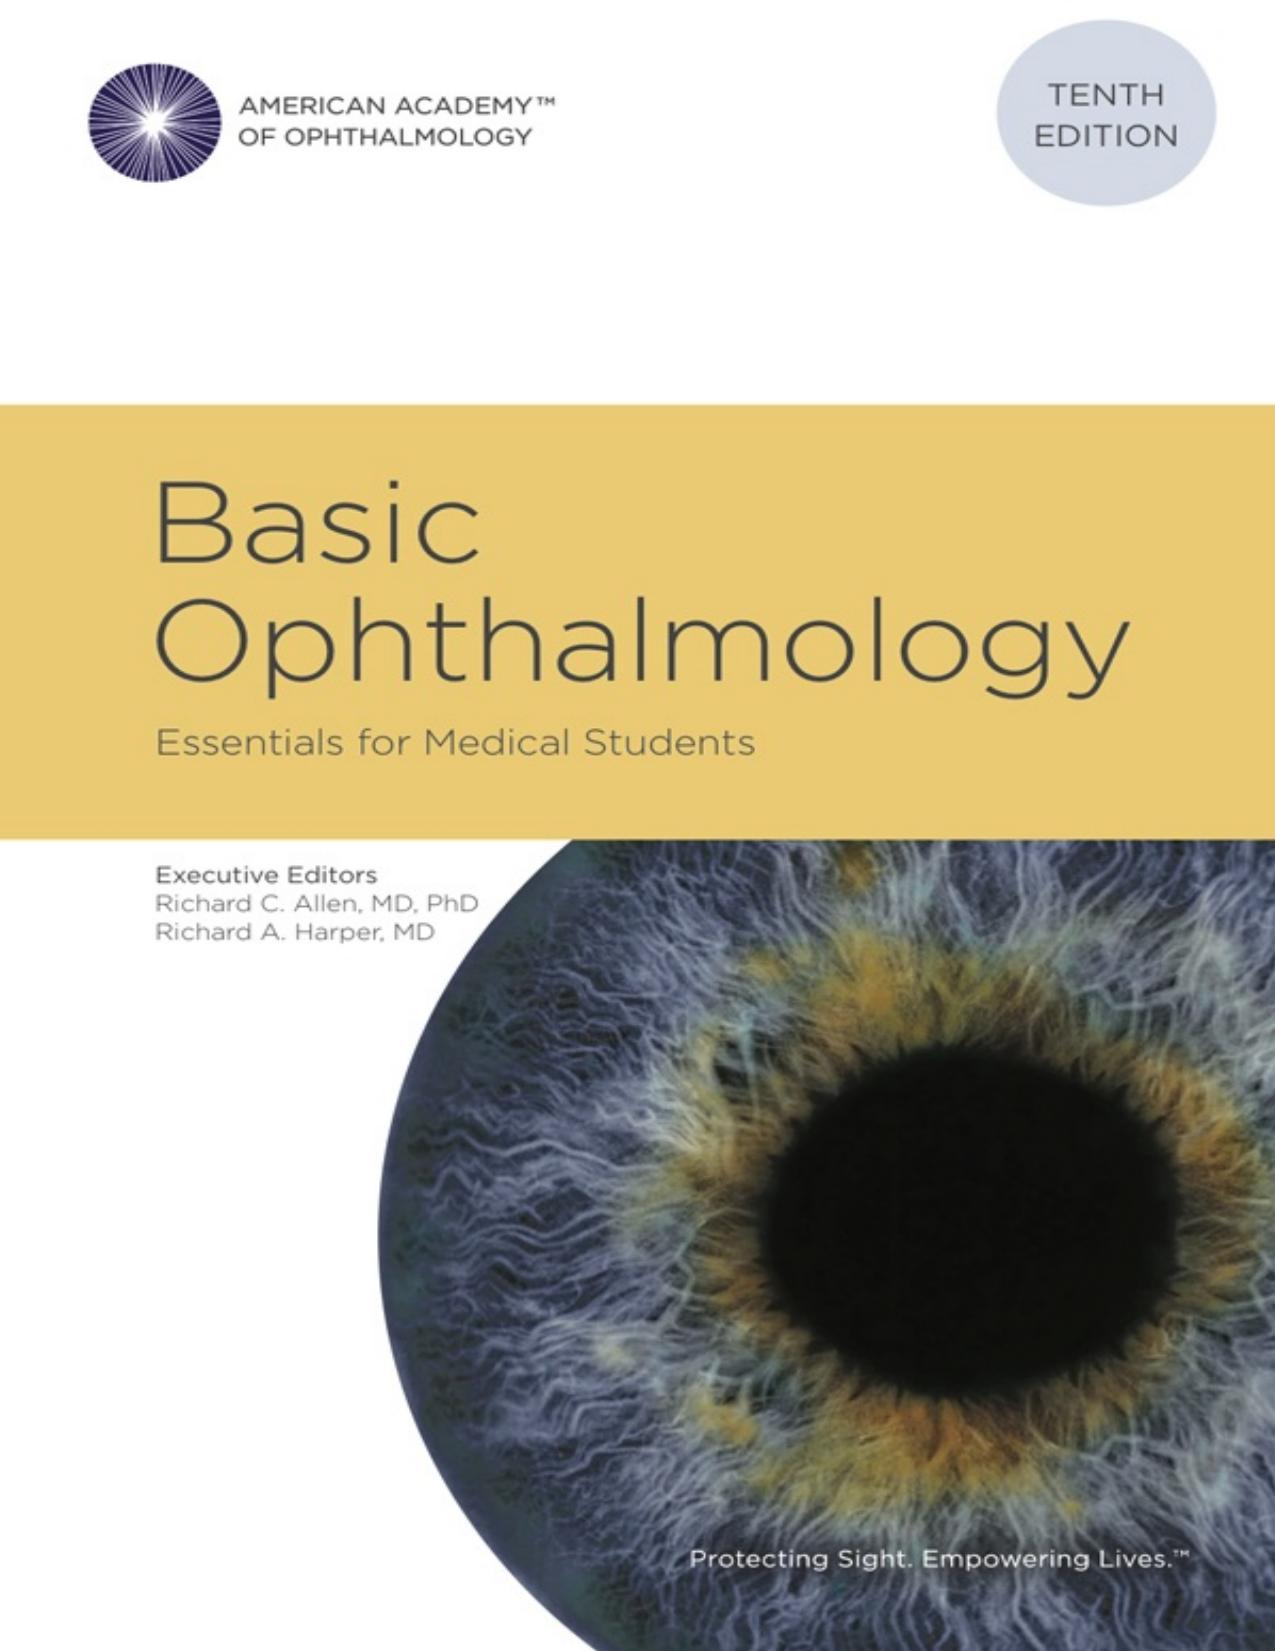 Basic Ophthalmology: Essentials for Medical Students - PDFDrive.com